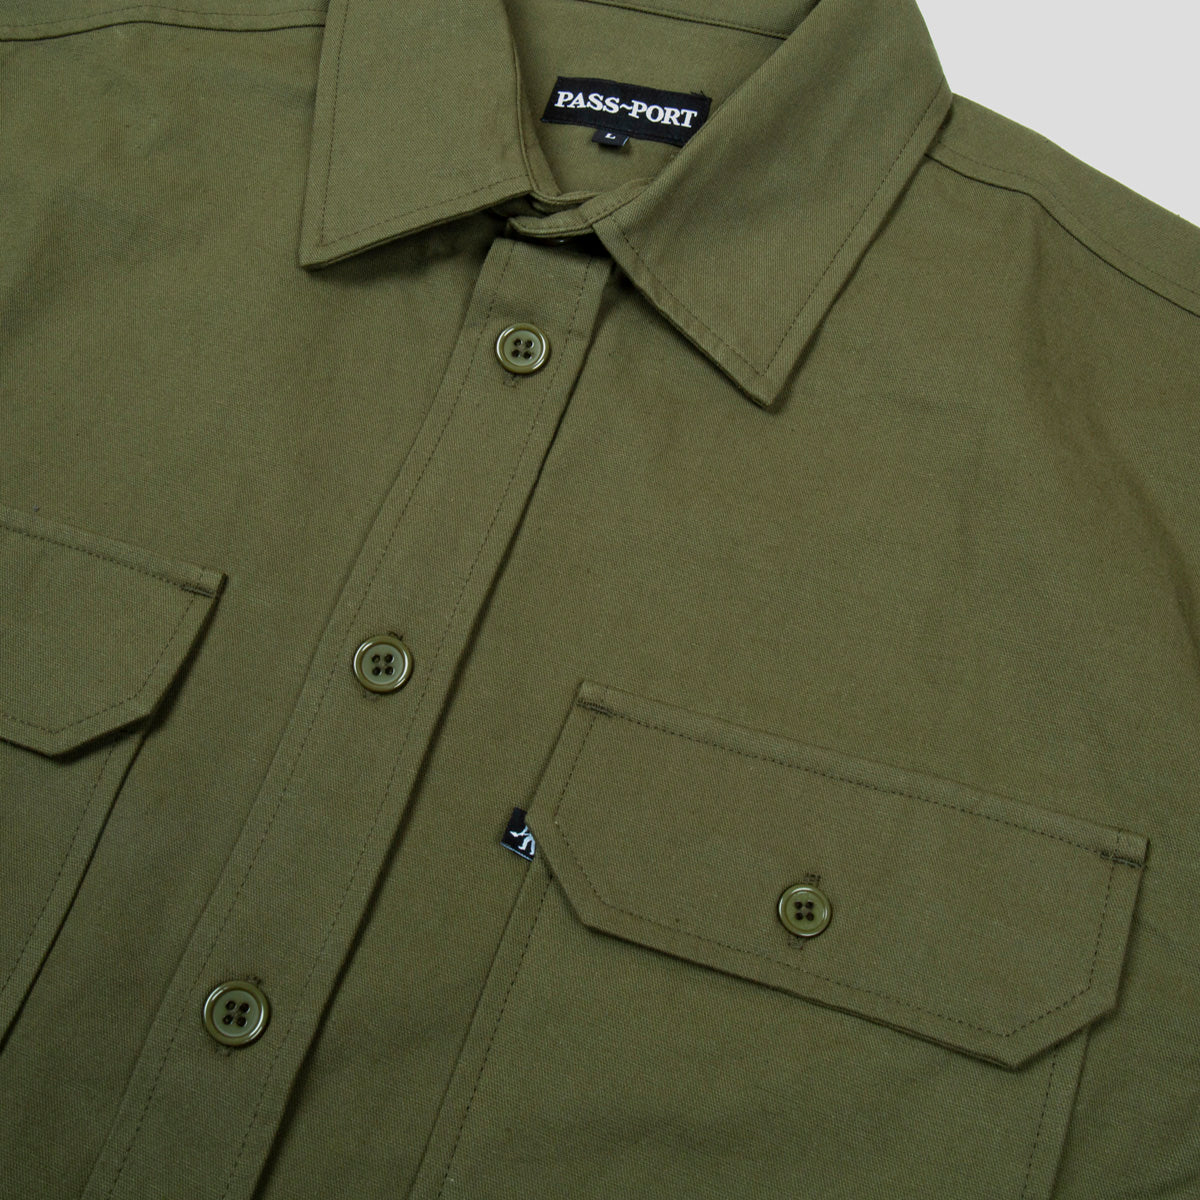 PASS~PORT "WORKERS" L/S SHIRT OLIVE